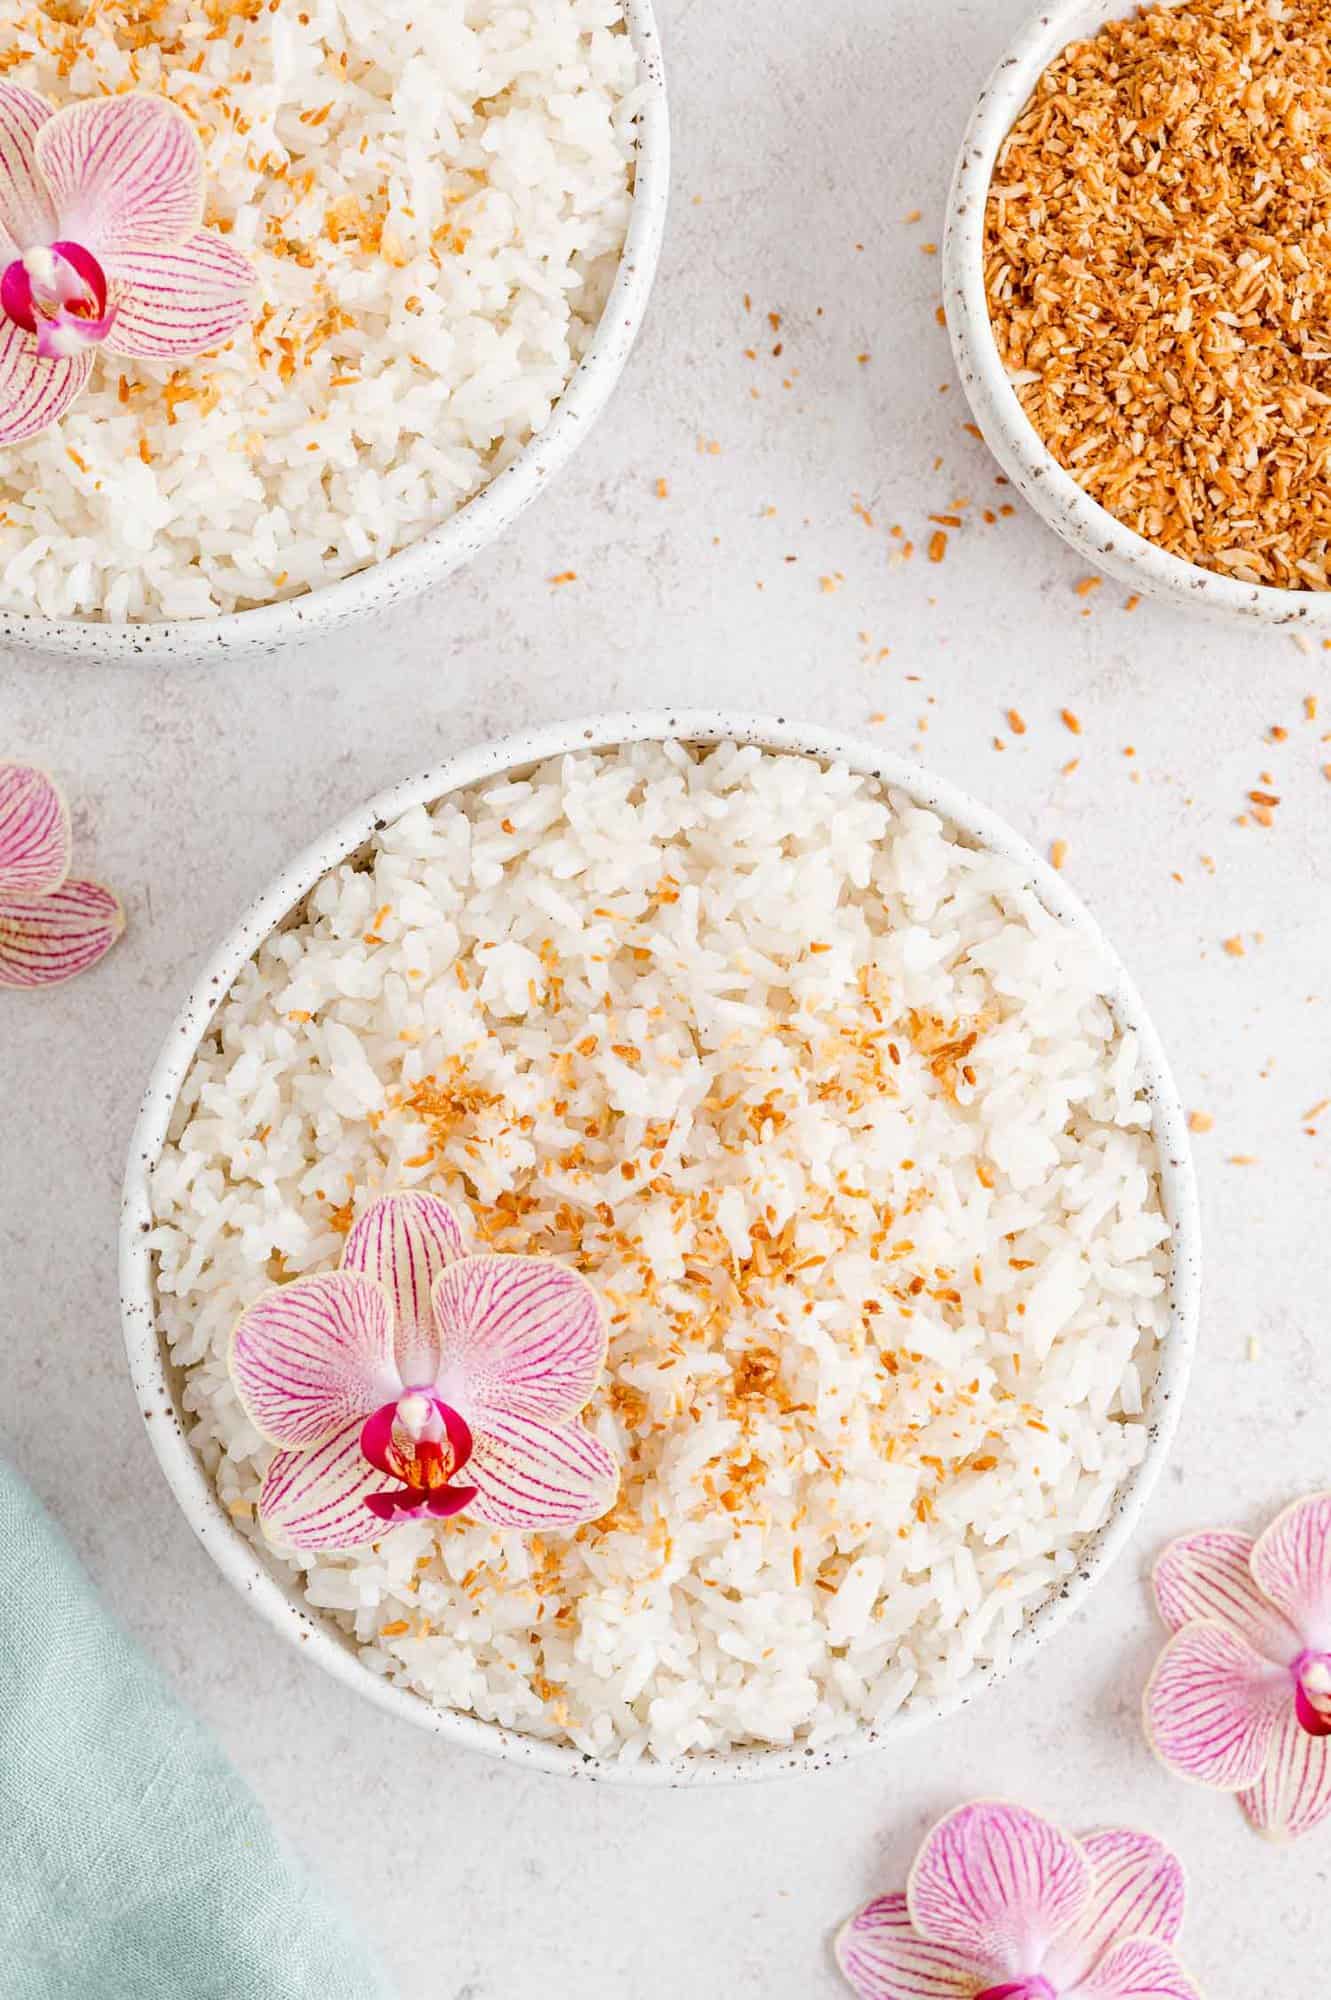 Coconut rice garnished with coconut flakes and a pink orchid.